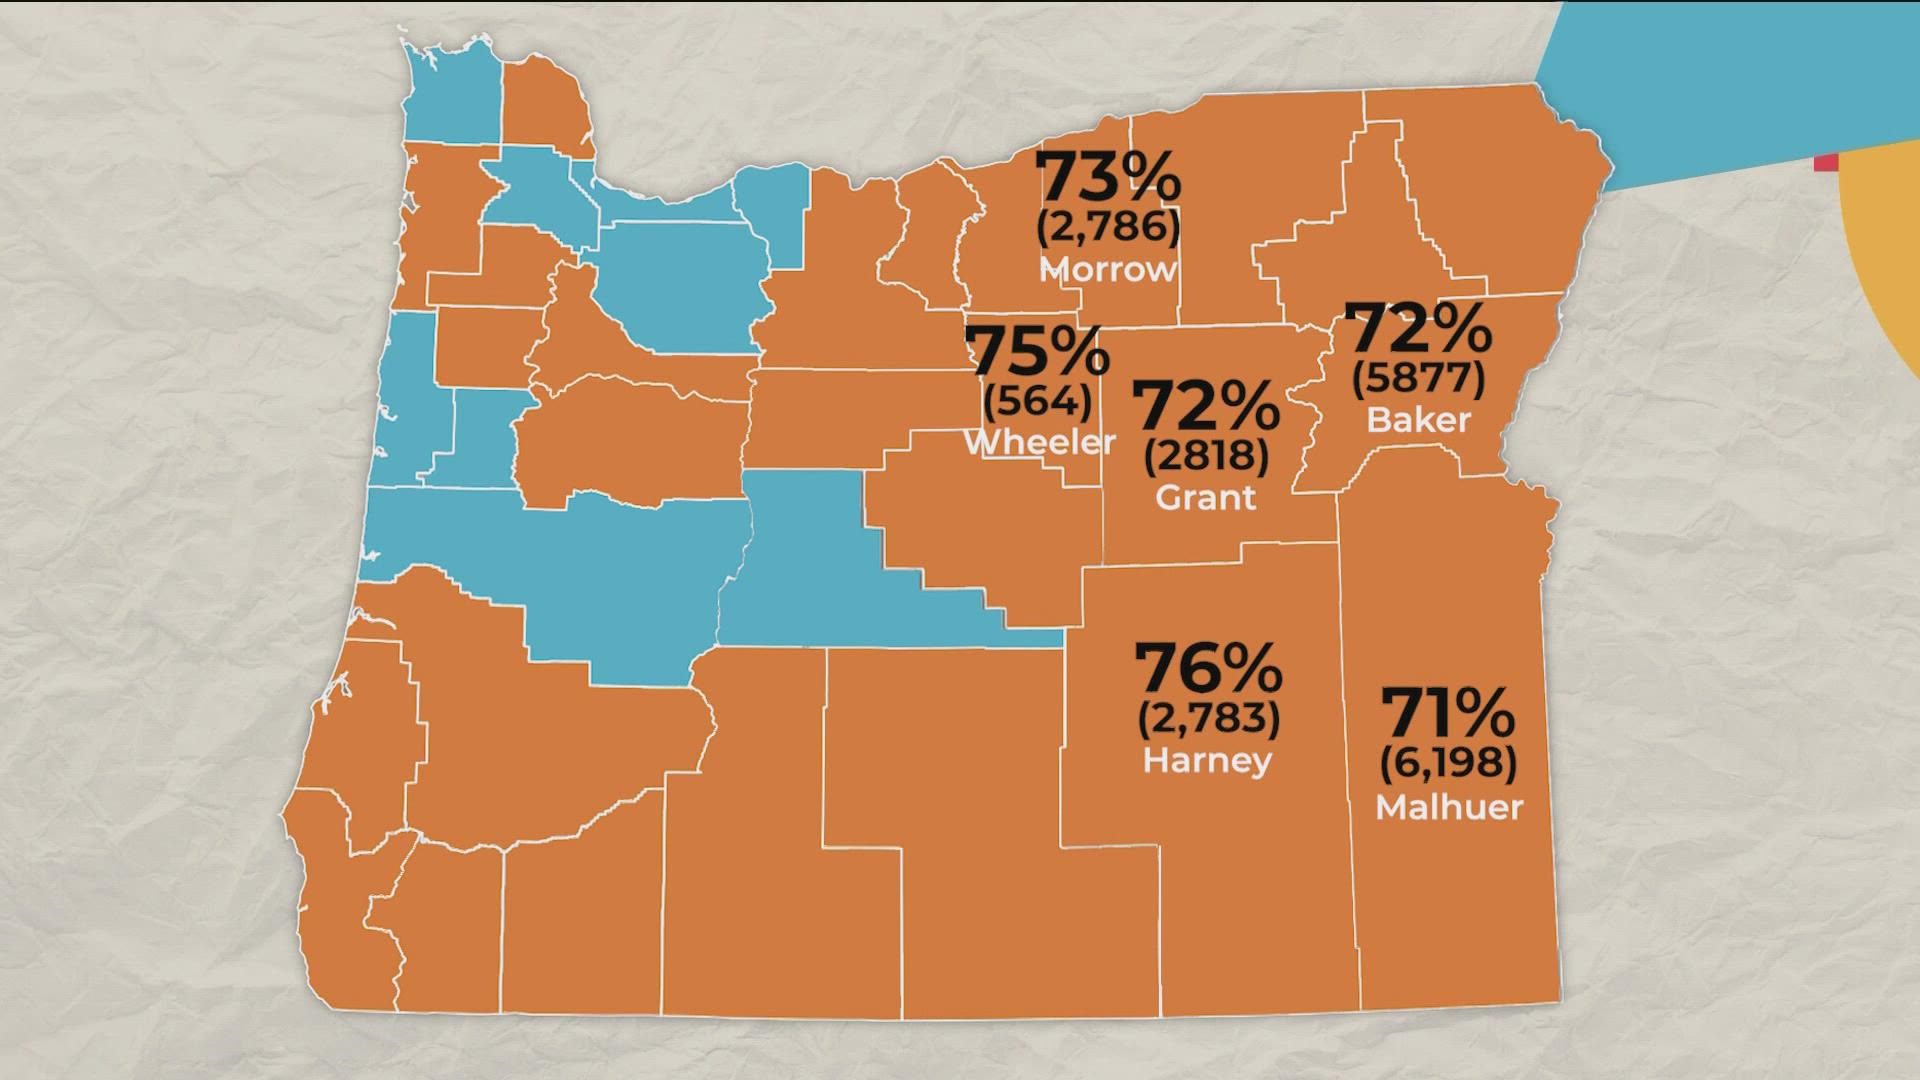 Measure 112 amends the state constitution to ban slavery in all circumstances. 44.5% voted against it, including major disapproval in eastern Oregon.